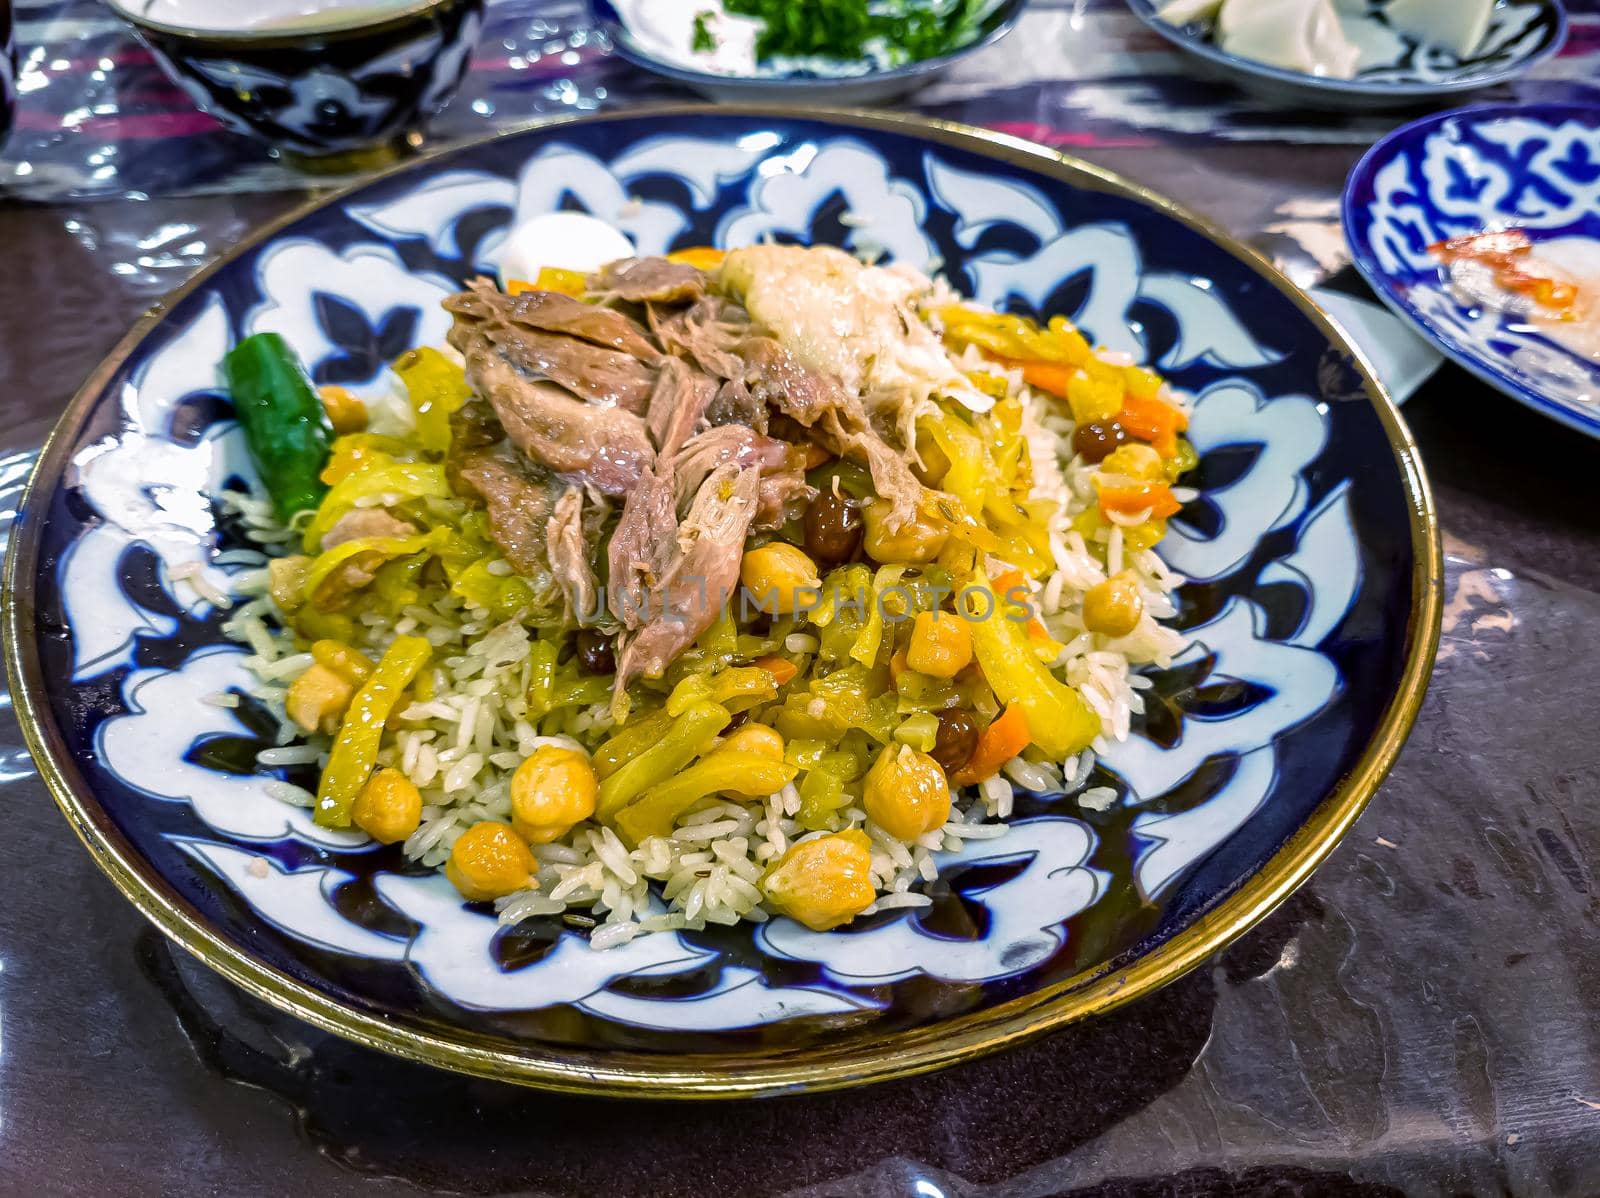 Traditional Uzbek pilaf from Samarkand. Meat, vegetables and rice are not mixed and laid out in layers by Milanchikov